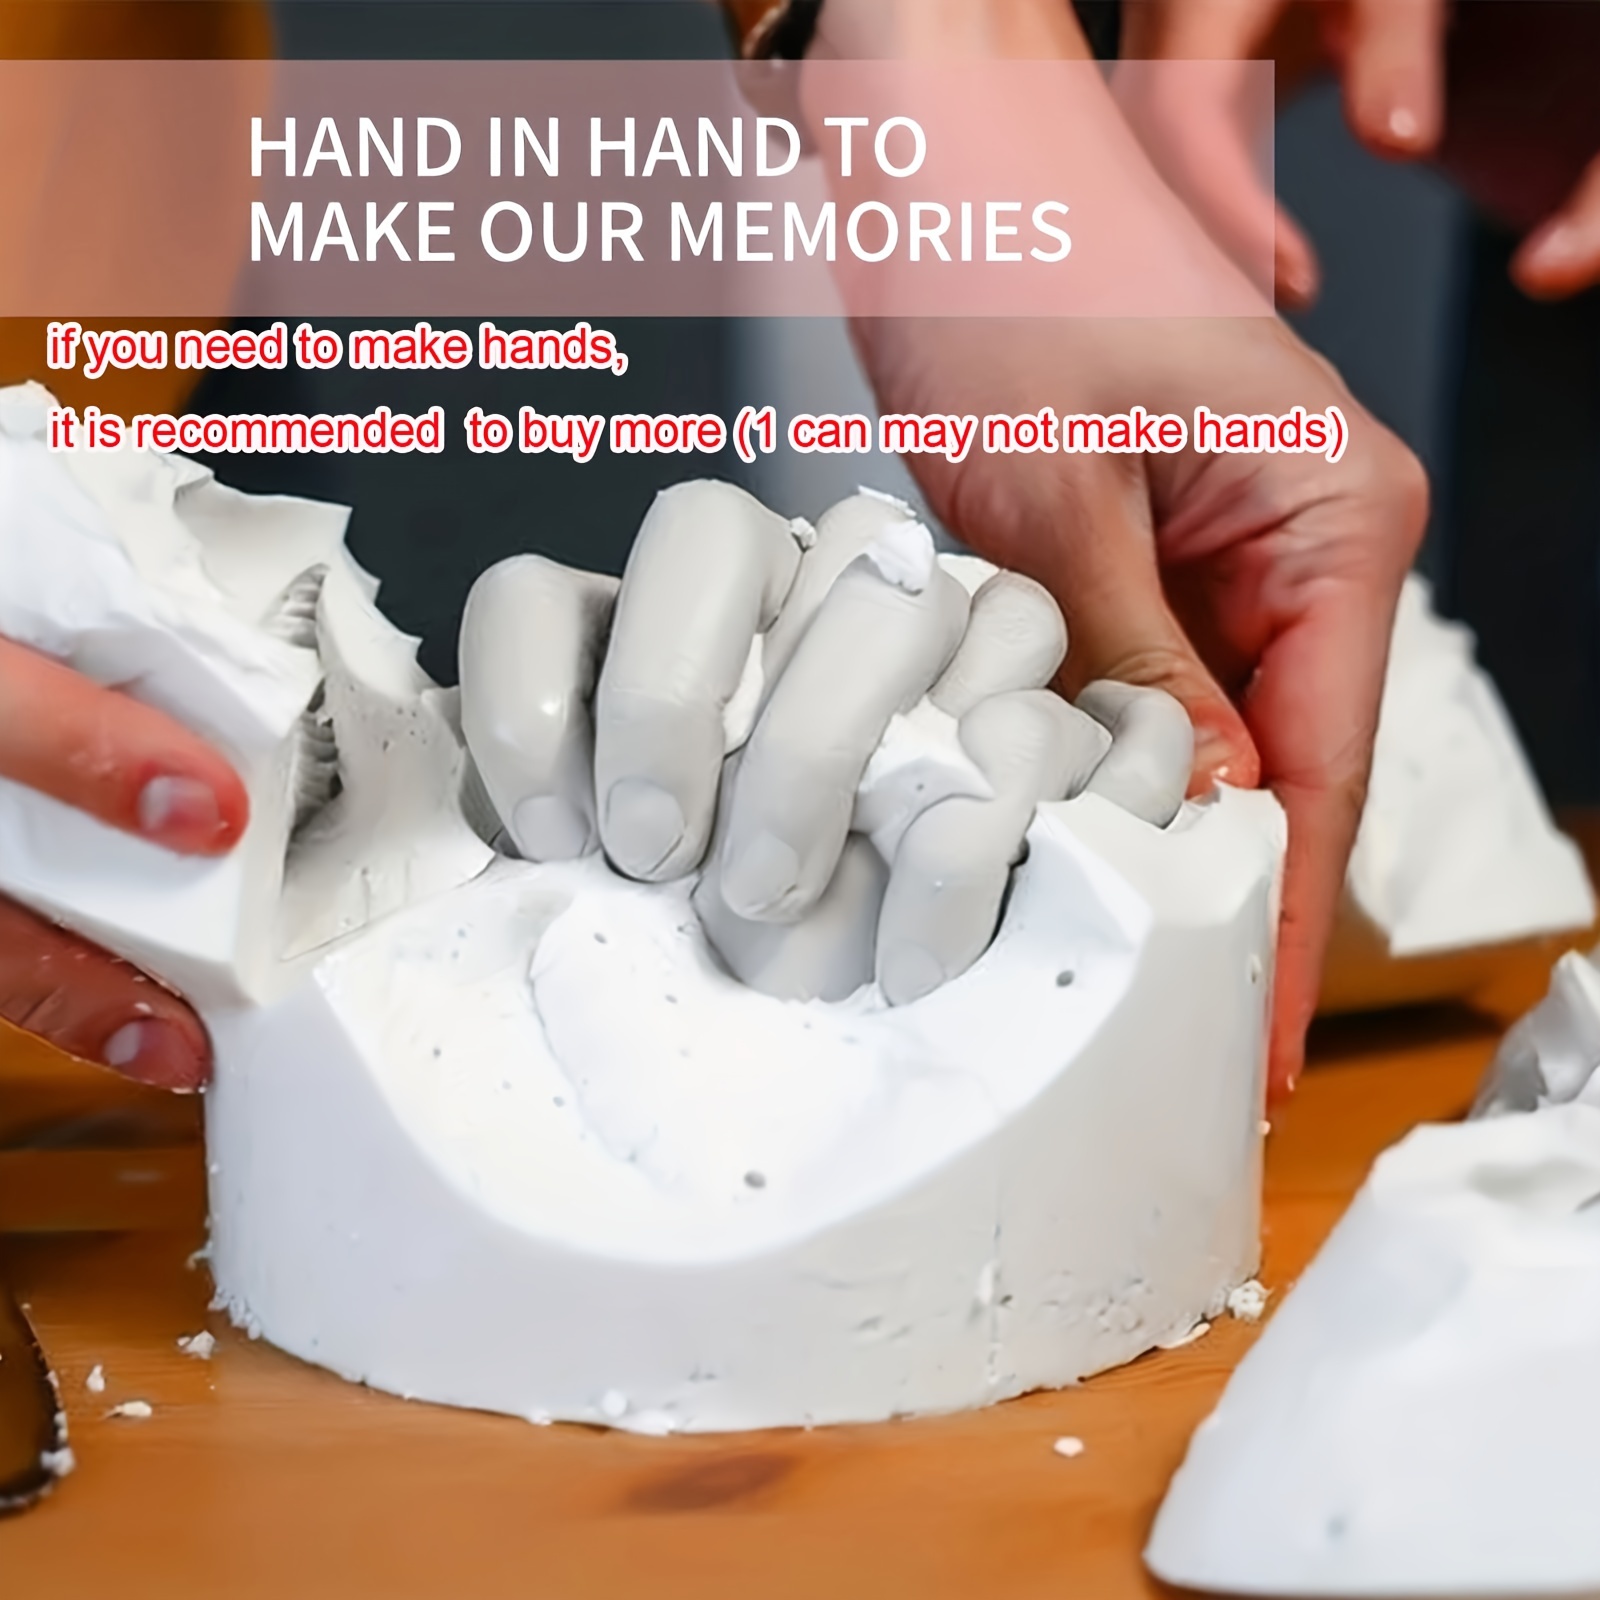 Hand Casting Kit Creative Family Couples Hand Molding Kit For Adults  Keepsake Hand Mold Kit Couples For Holiday Activities